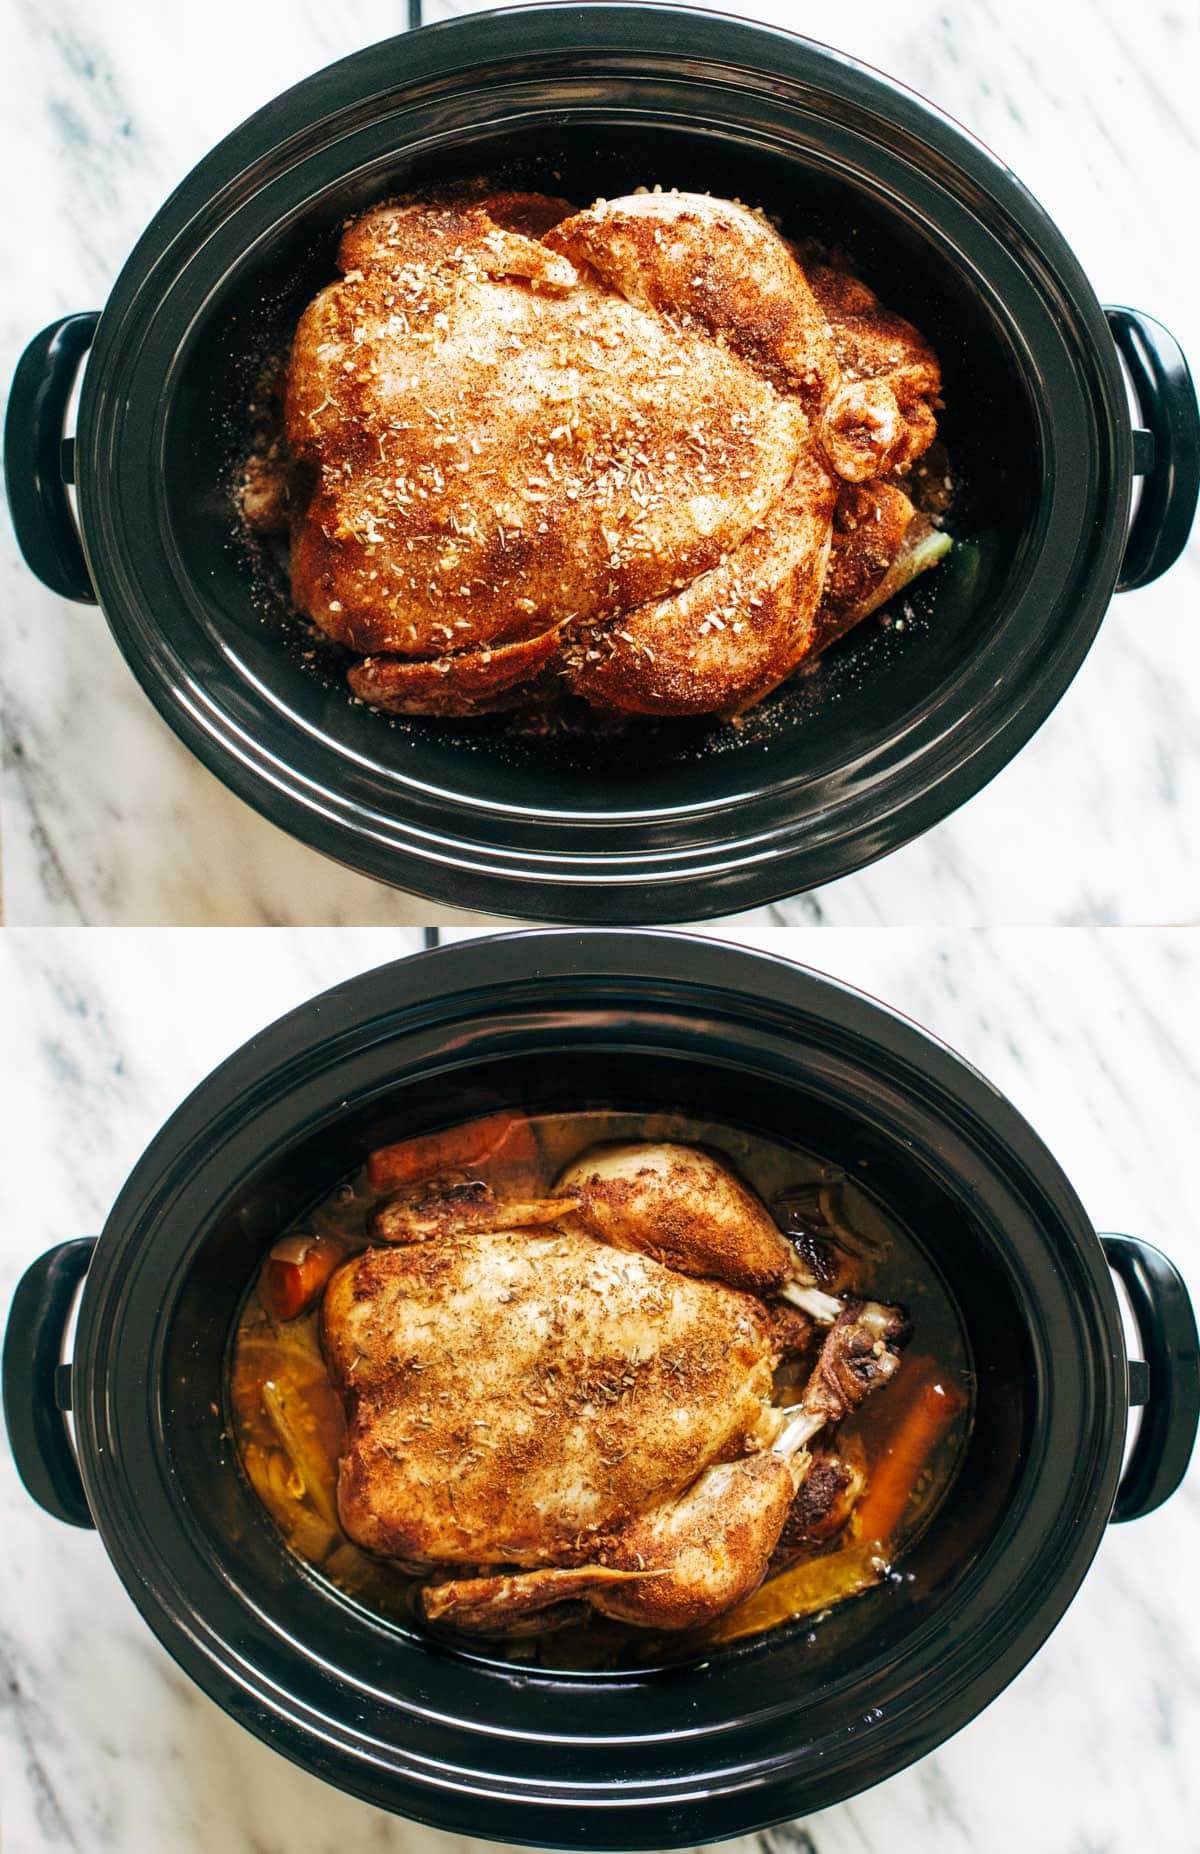 12 SUPER easy recipes you can make in a slow cooker, from vegetarian lasagna to a whole roast chicken and roasted in a pot! SO YUM! | pinchofyum.com